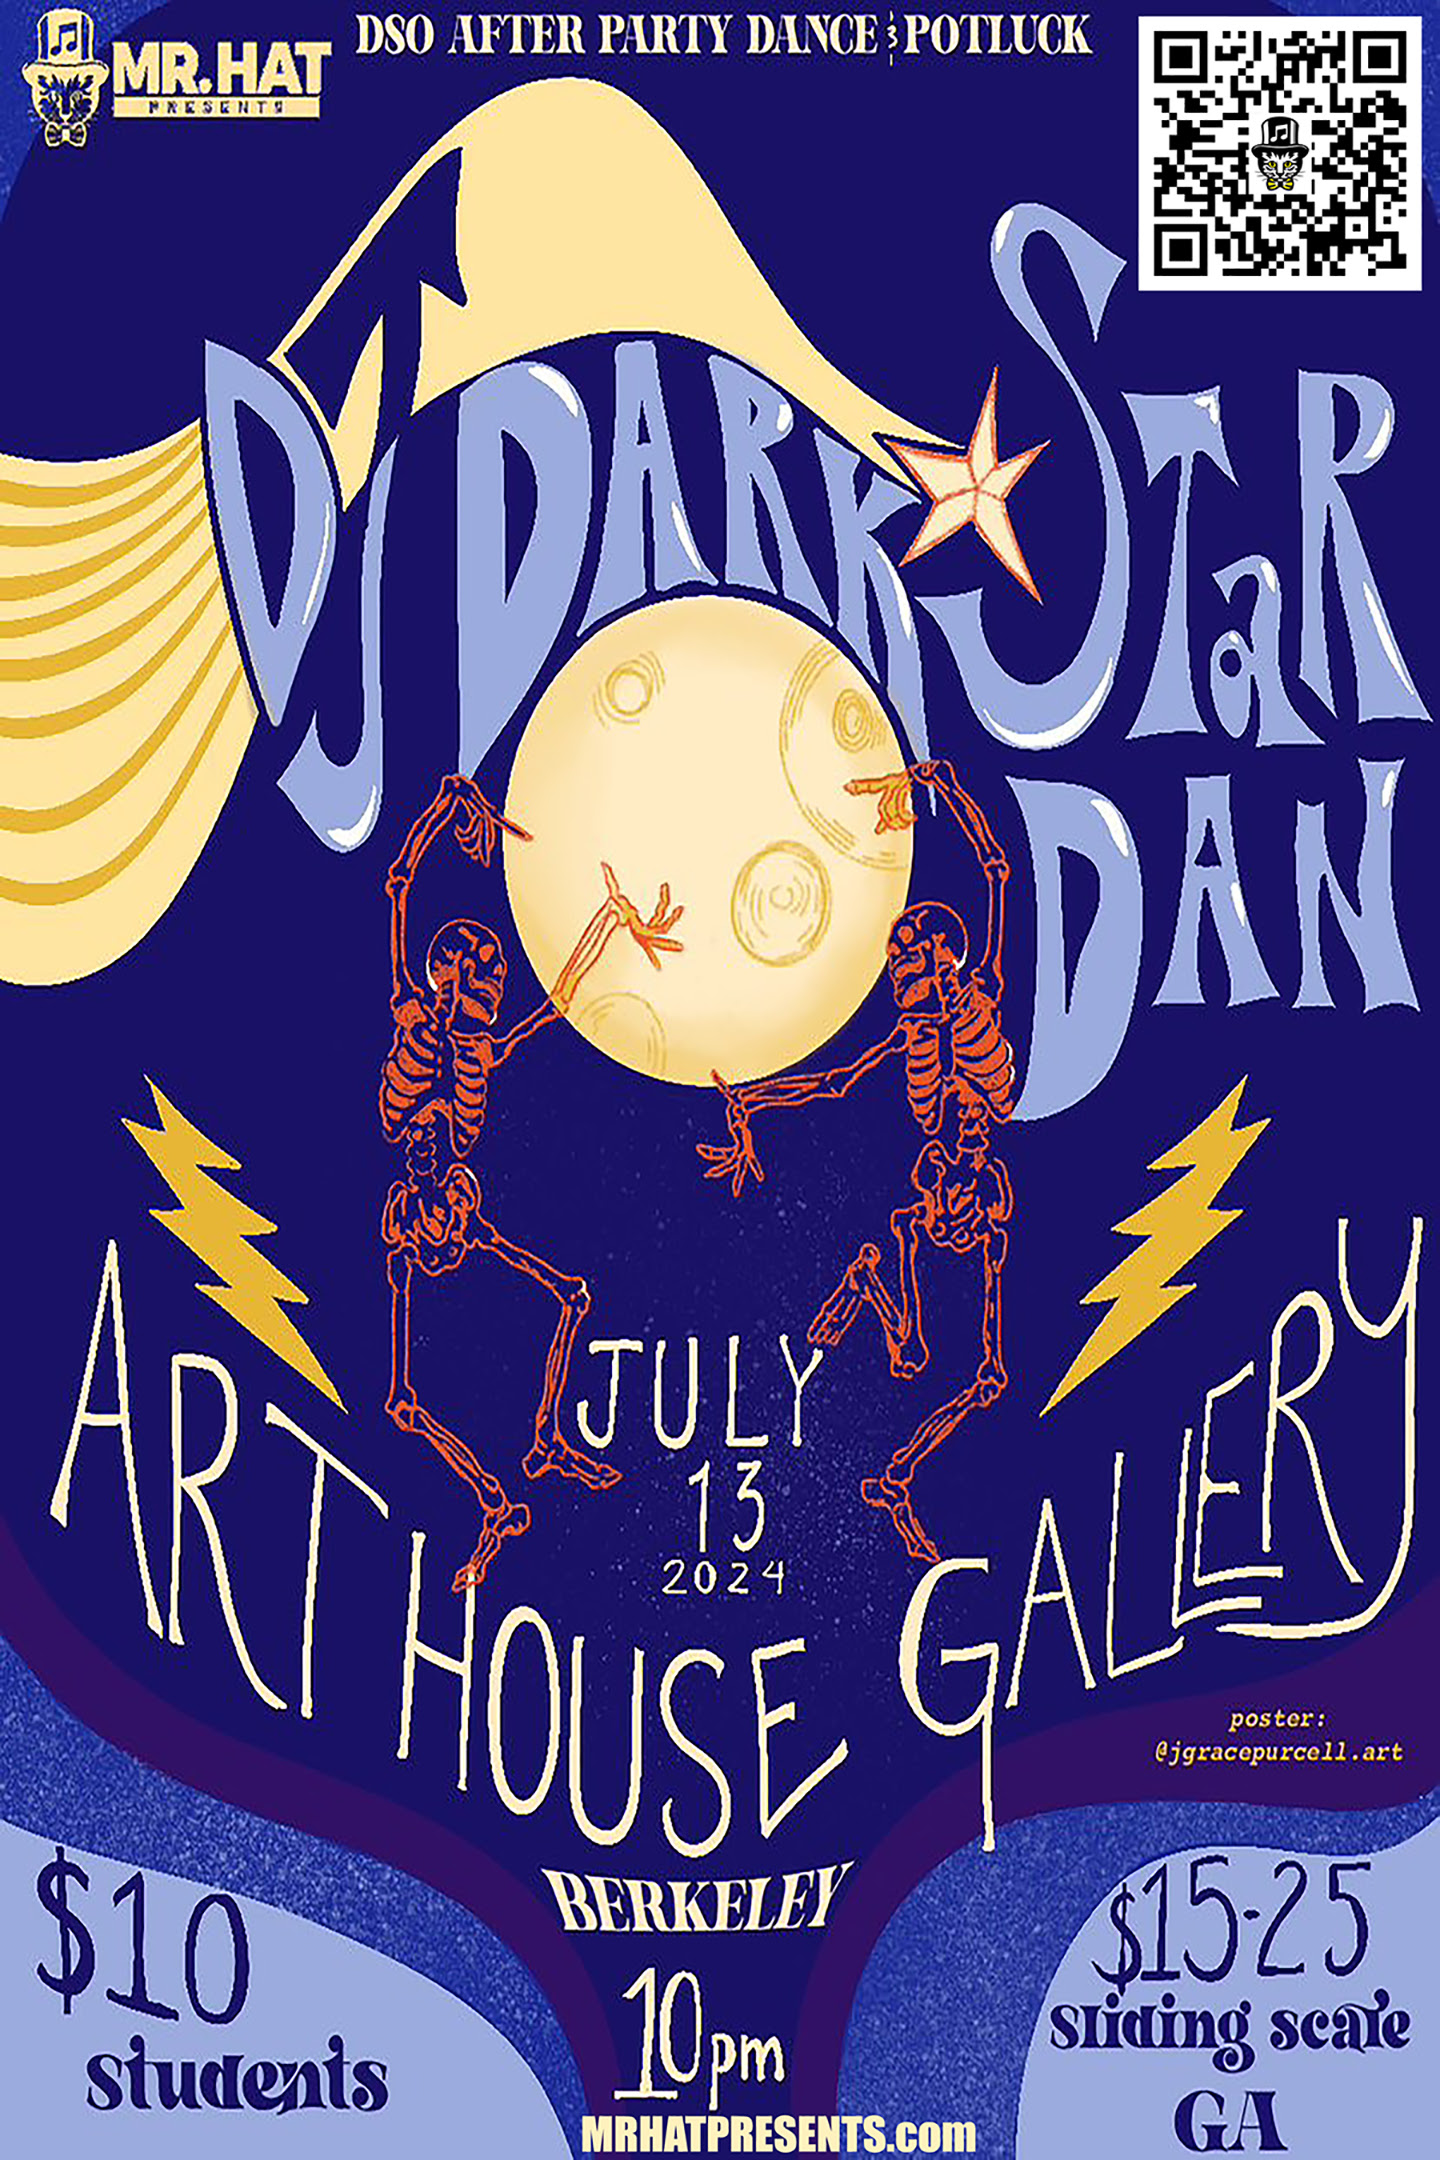 DSO Afterparty w/ DJ Darkstar Dan | Art House Gallery & Cultural Center - Tonight!